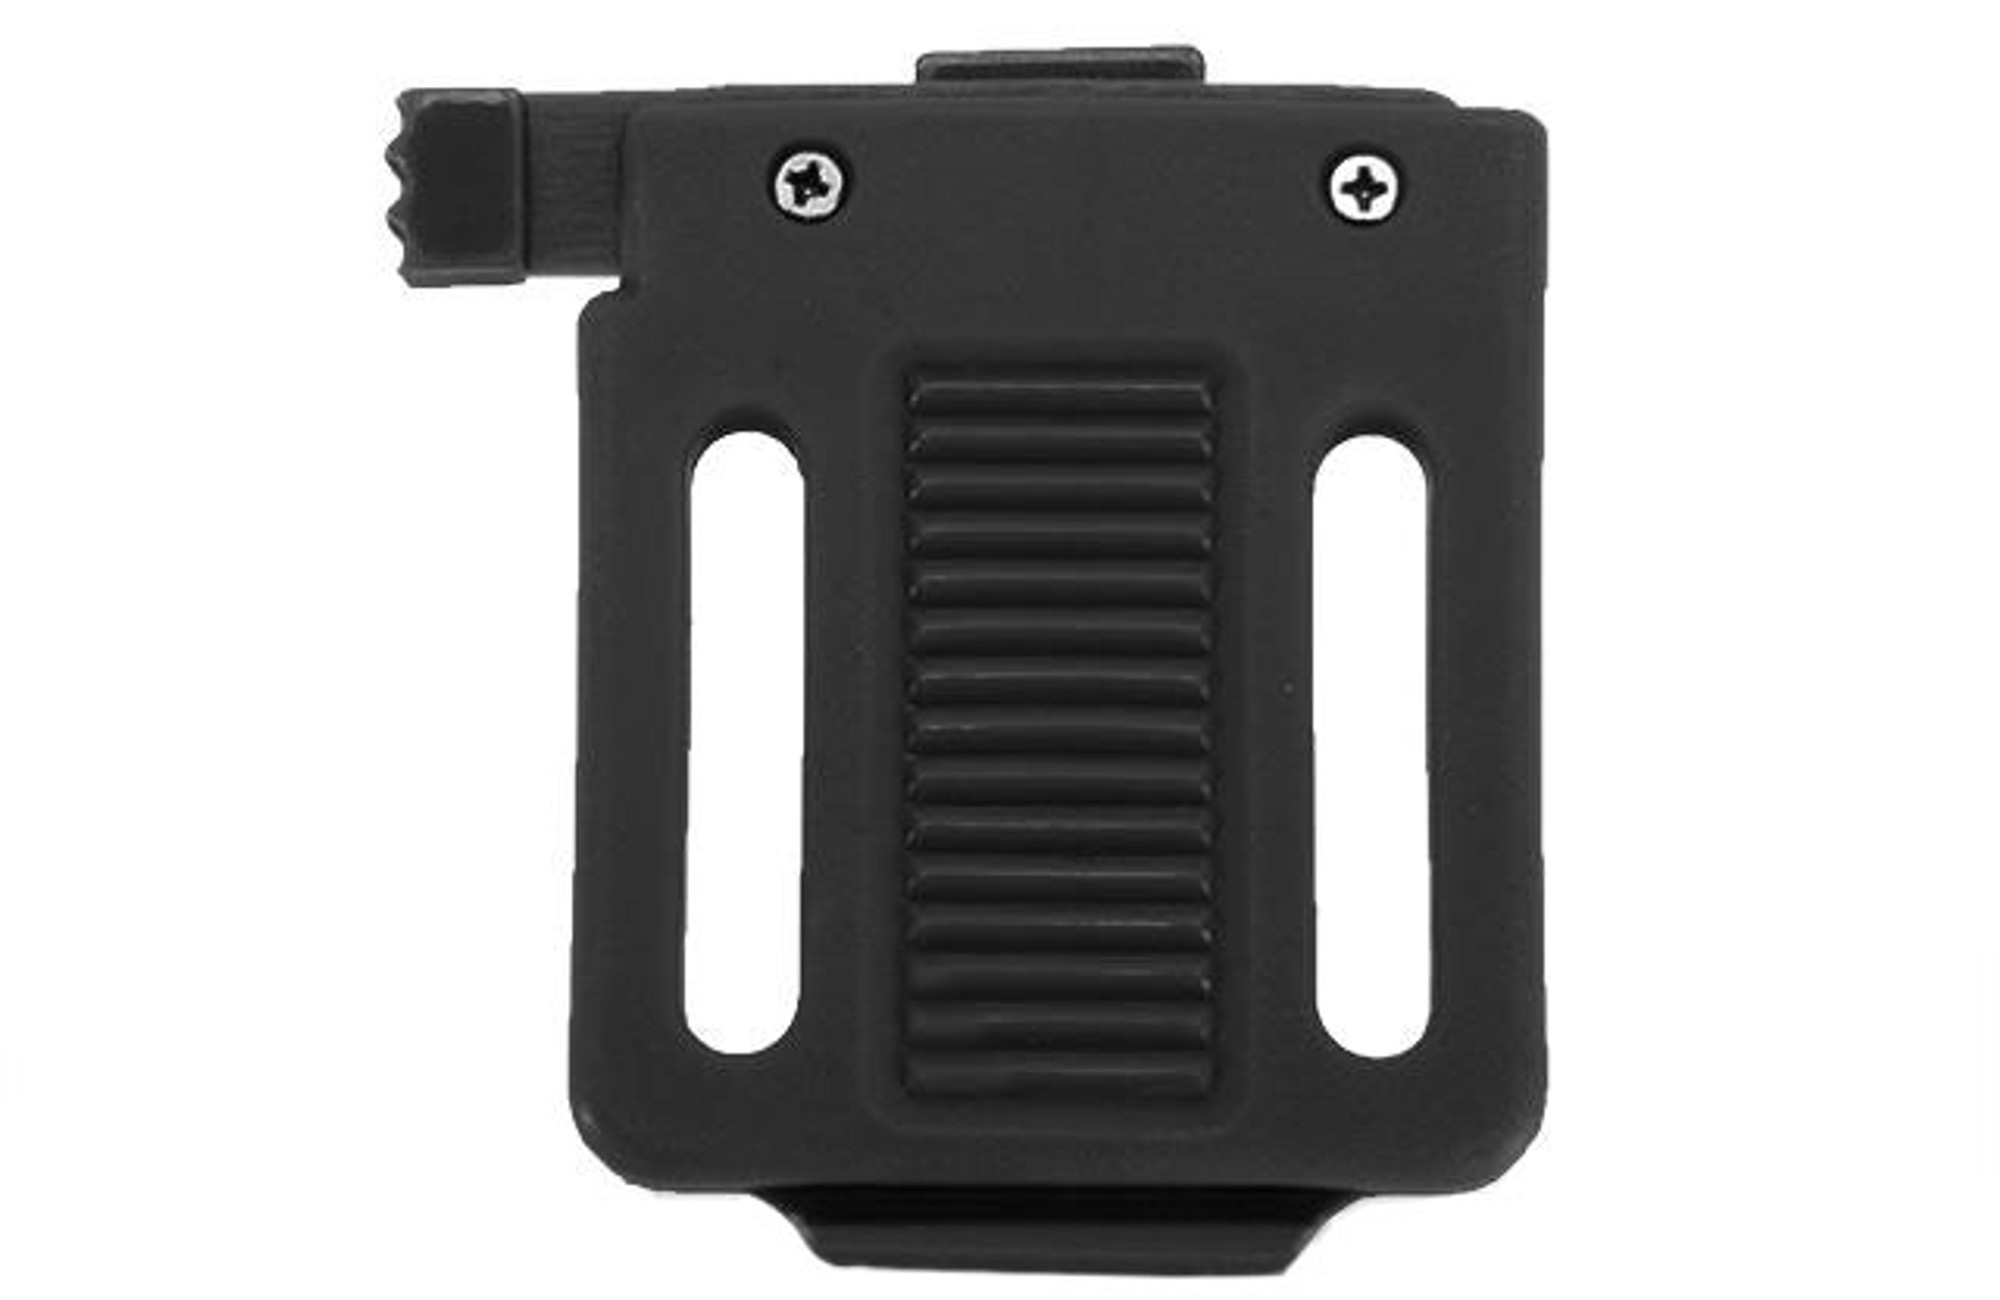 Avengers NVG Type Adapter For Airsoft Bump Helmets - Black